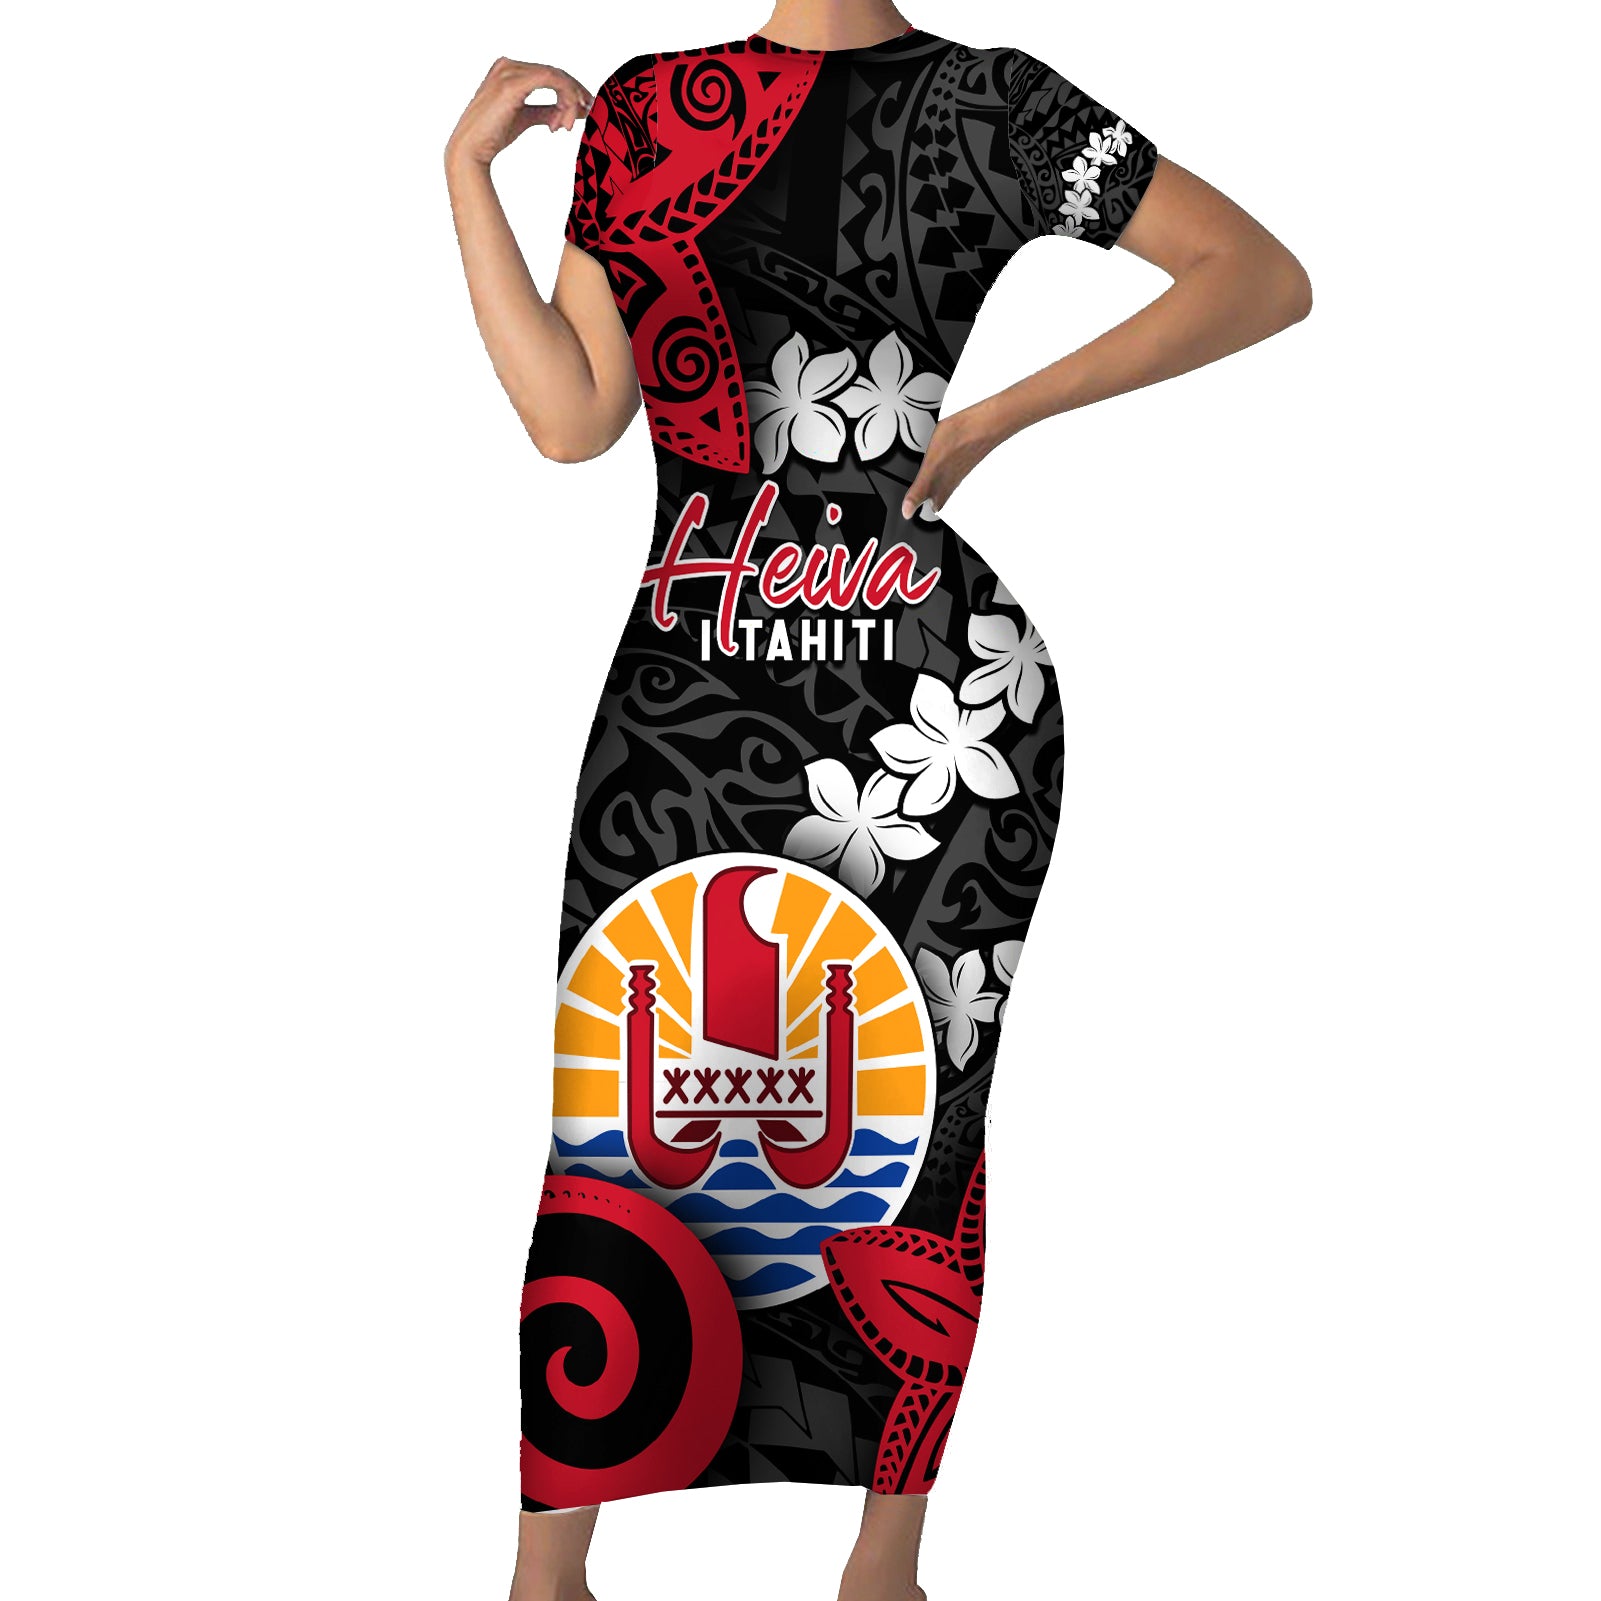 Tahiti Heiva Festival Short Sleeve Bodycon Dress Floral Pattern With Coat Of Arms